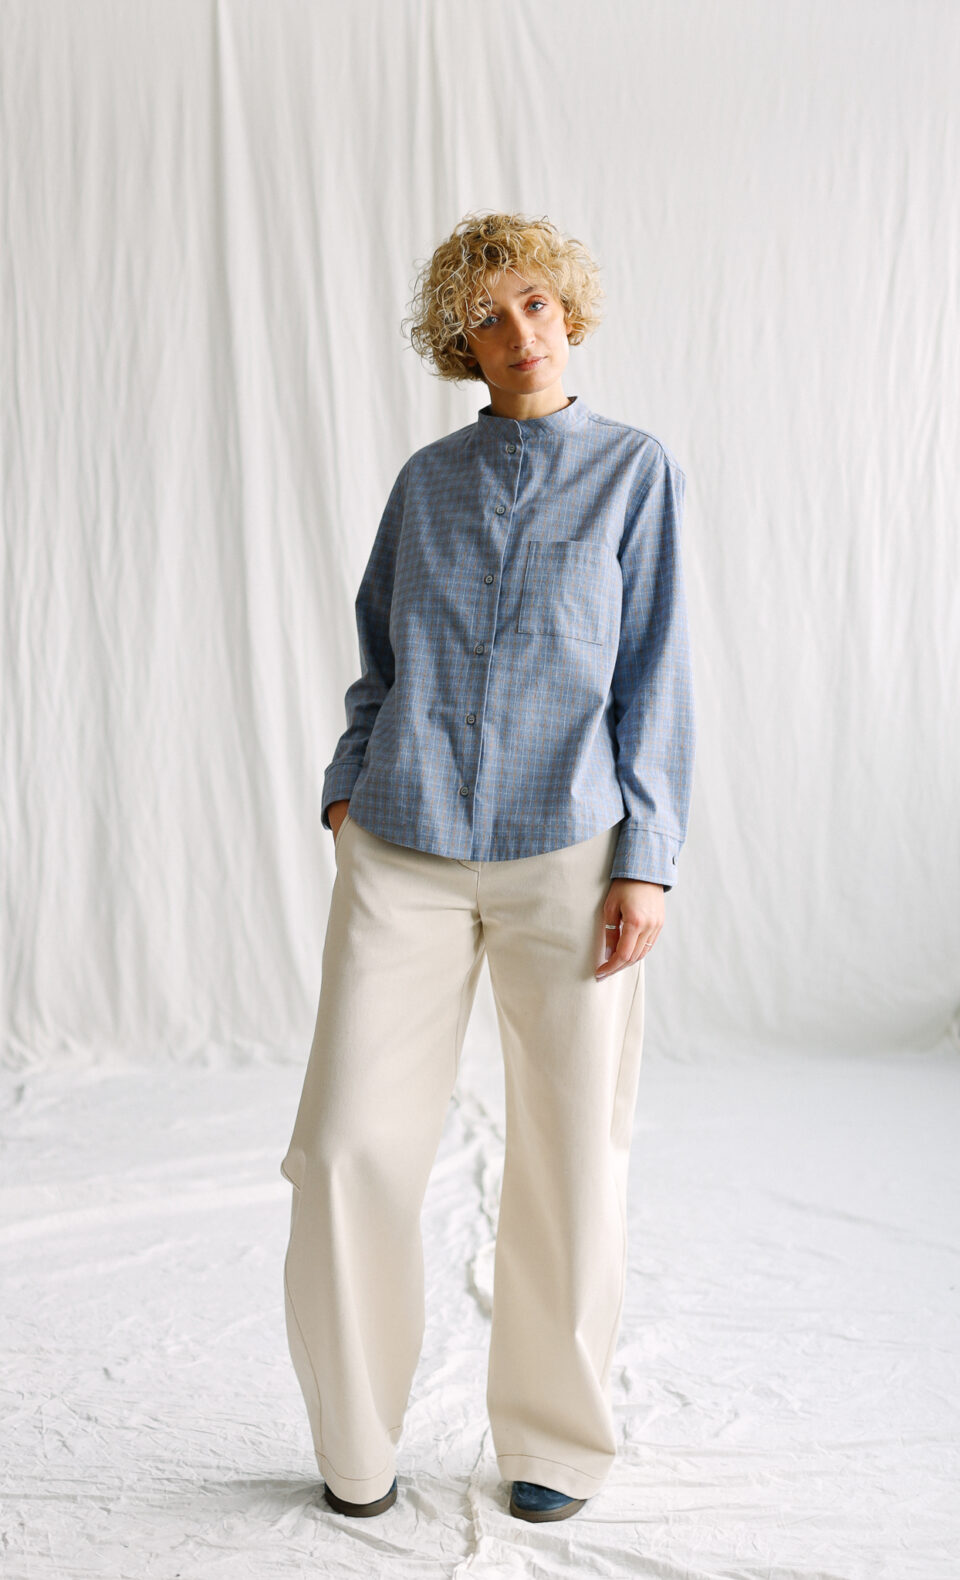 Mandarin collar shirt in light blue plaid brushed cotton REINE | Top | Sustainable clothing | OffOn clothing